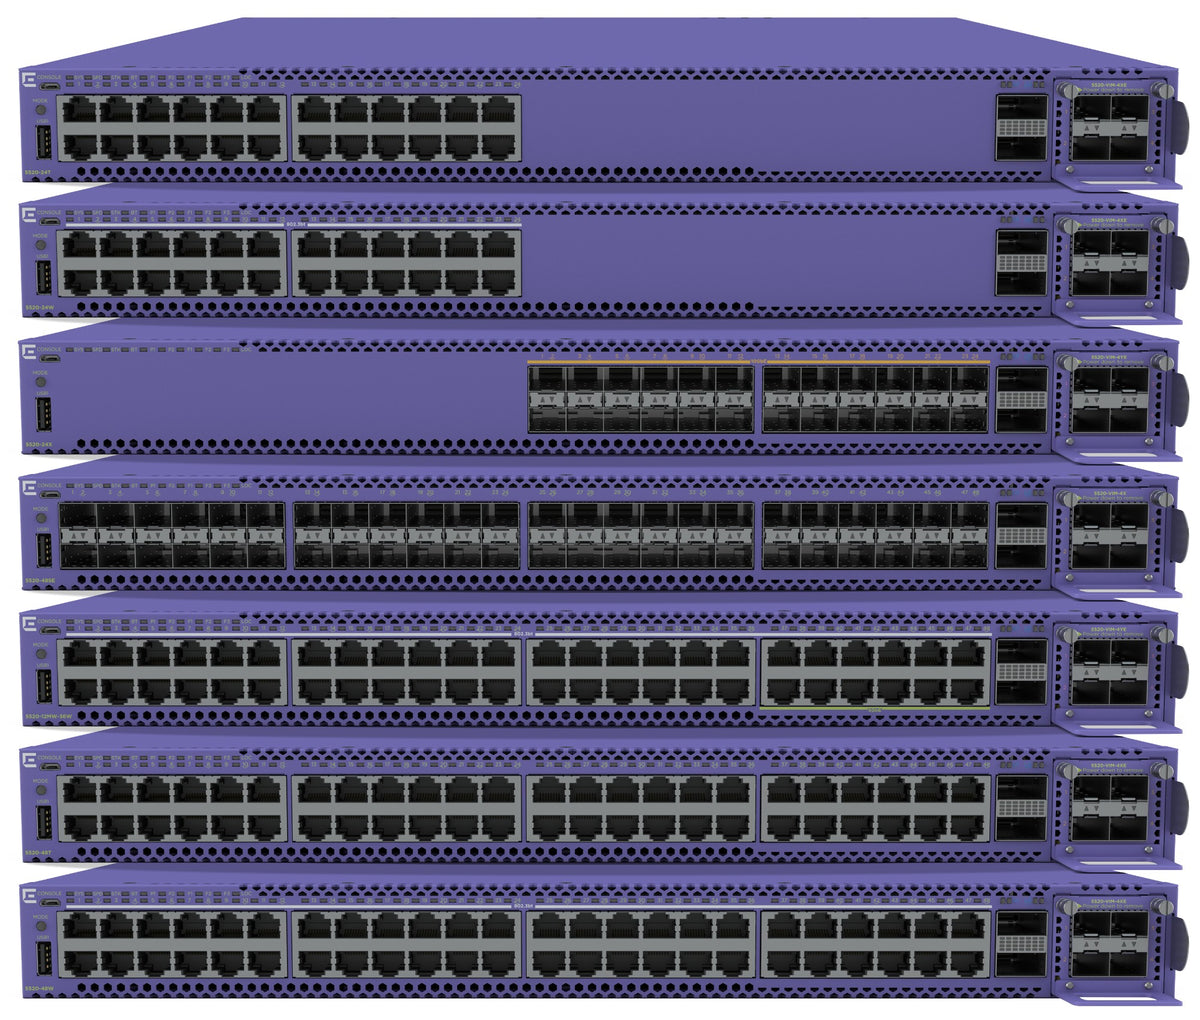 5520-24X - Extreme networks - network switch L2/L3 None Purple